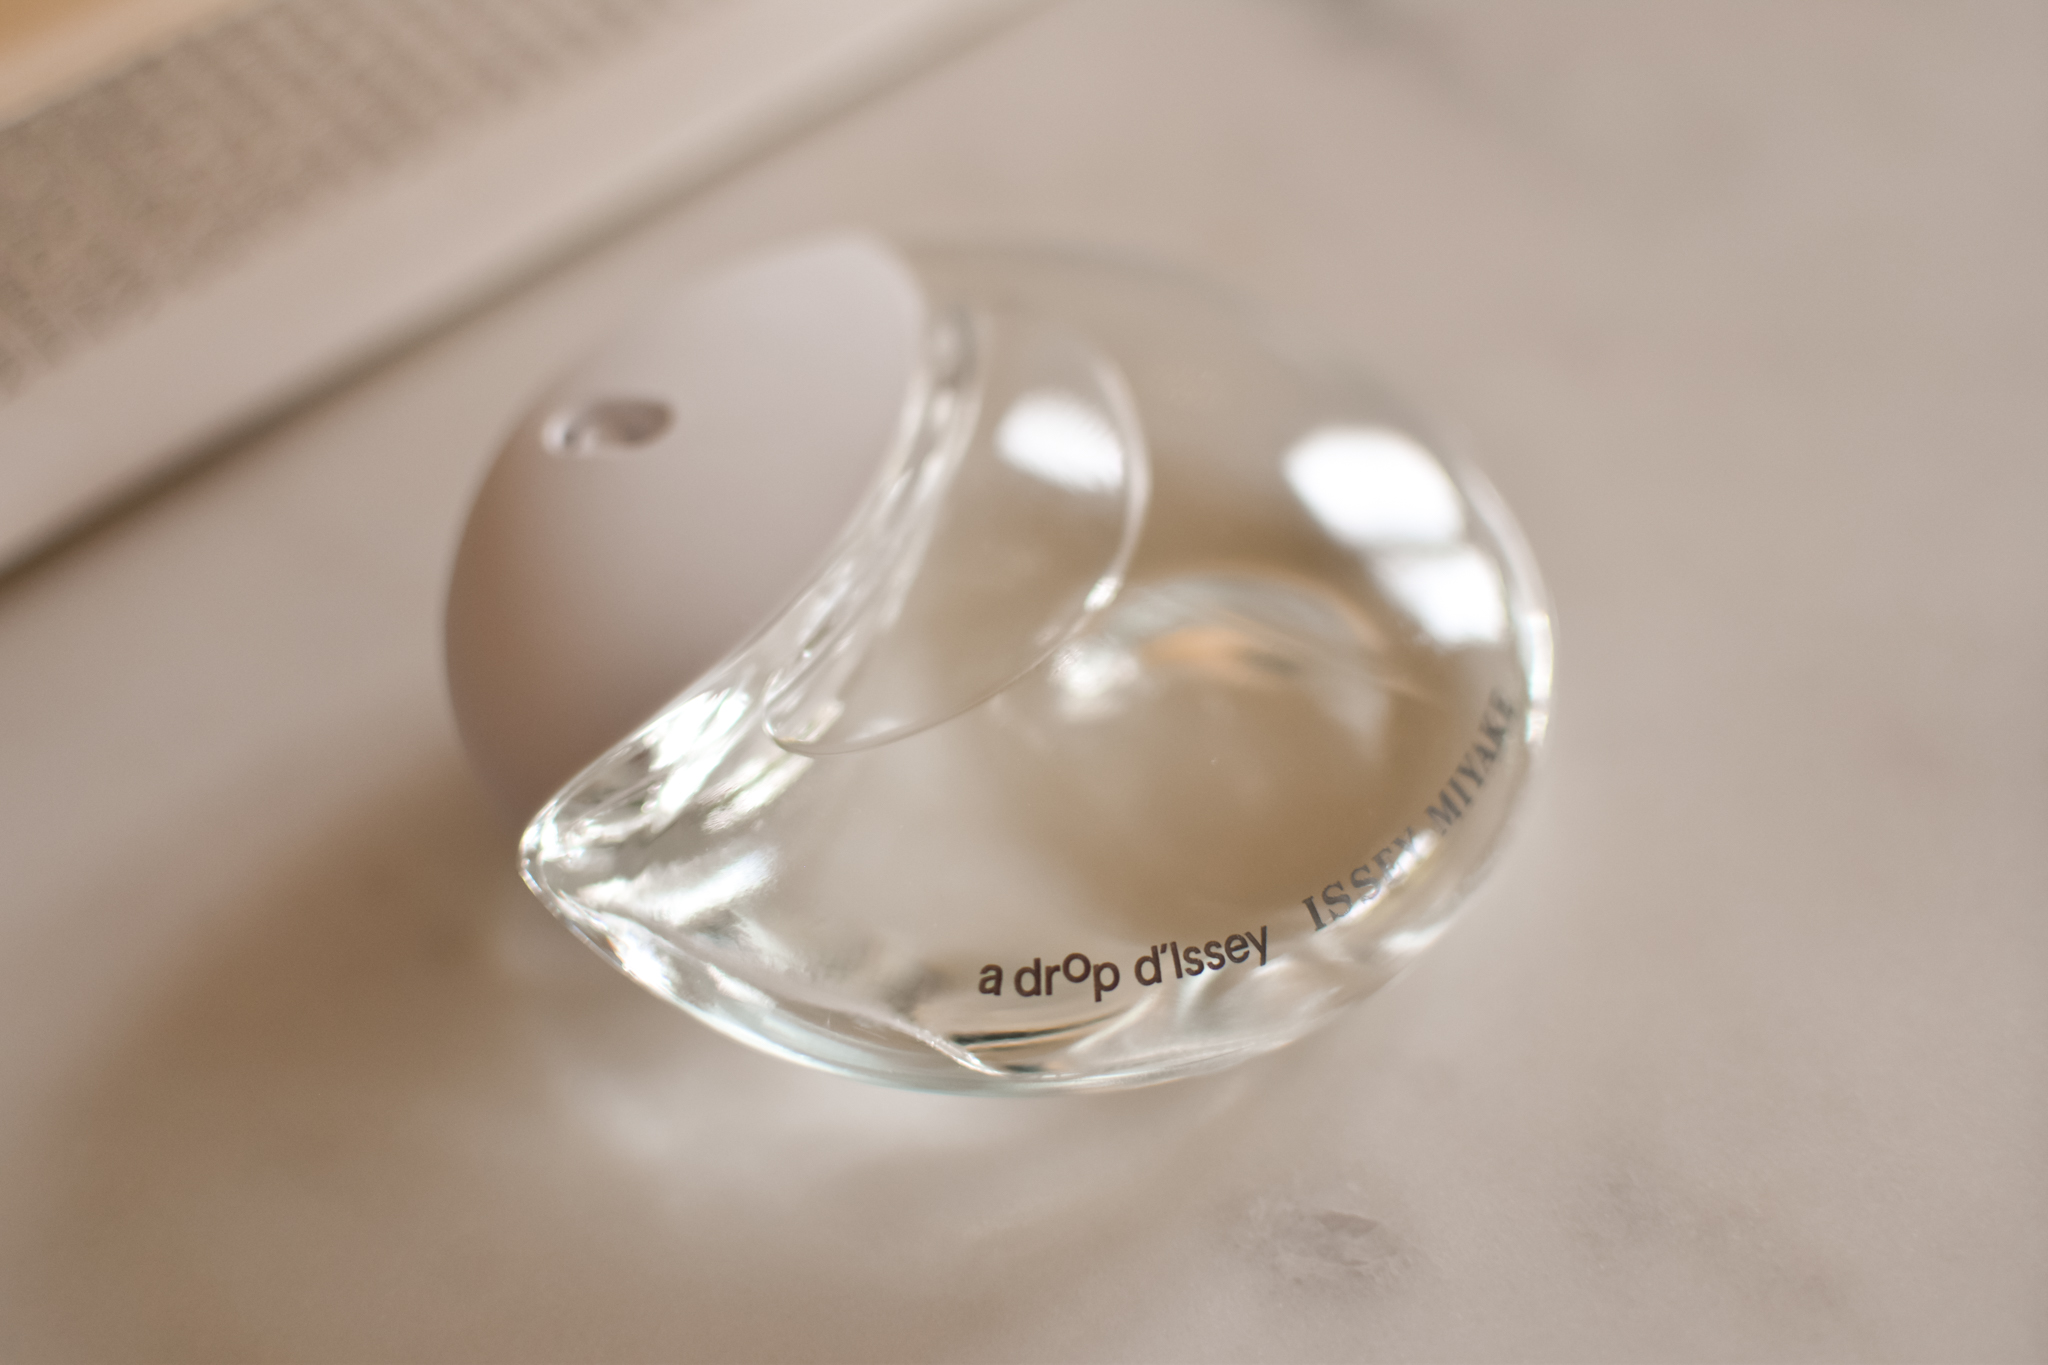 ISSEY MIYAKE - a drop d'Issey